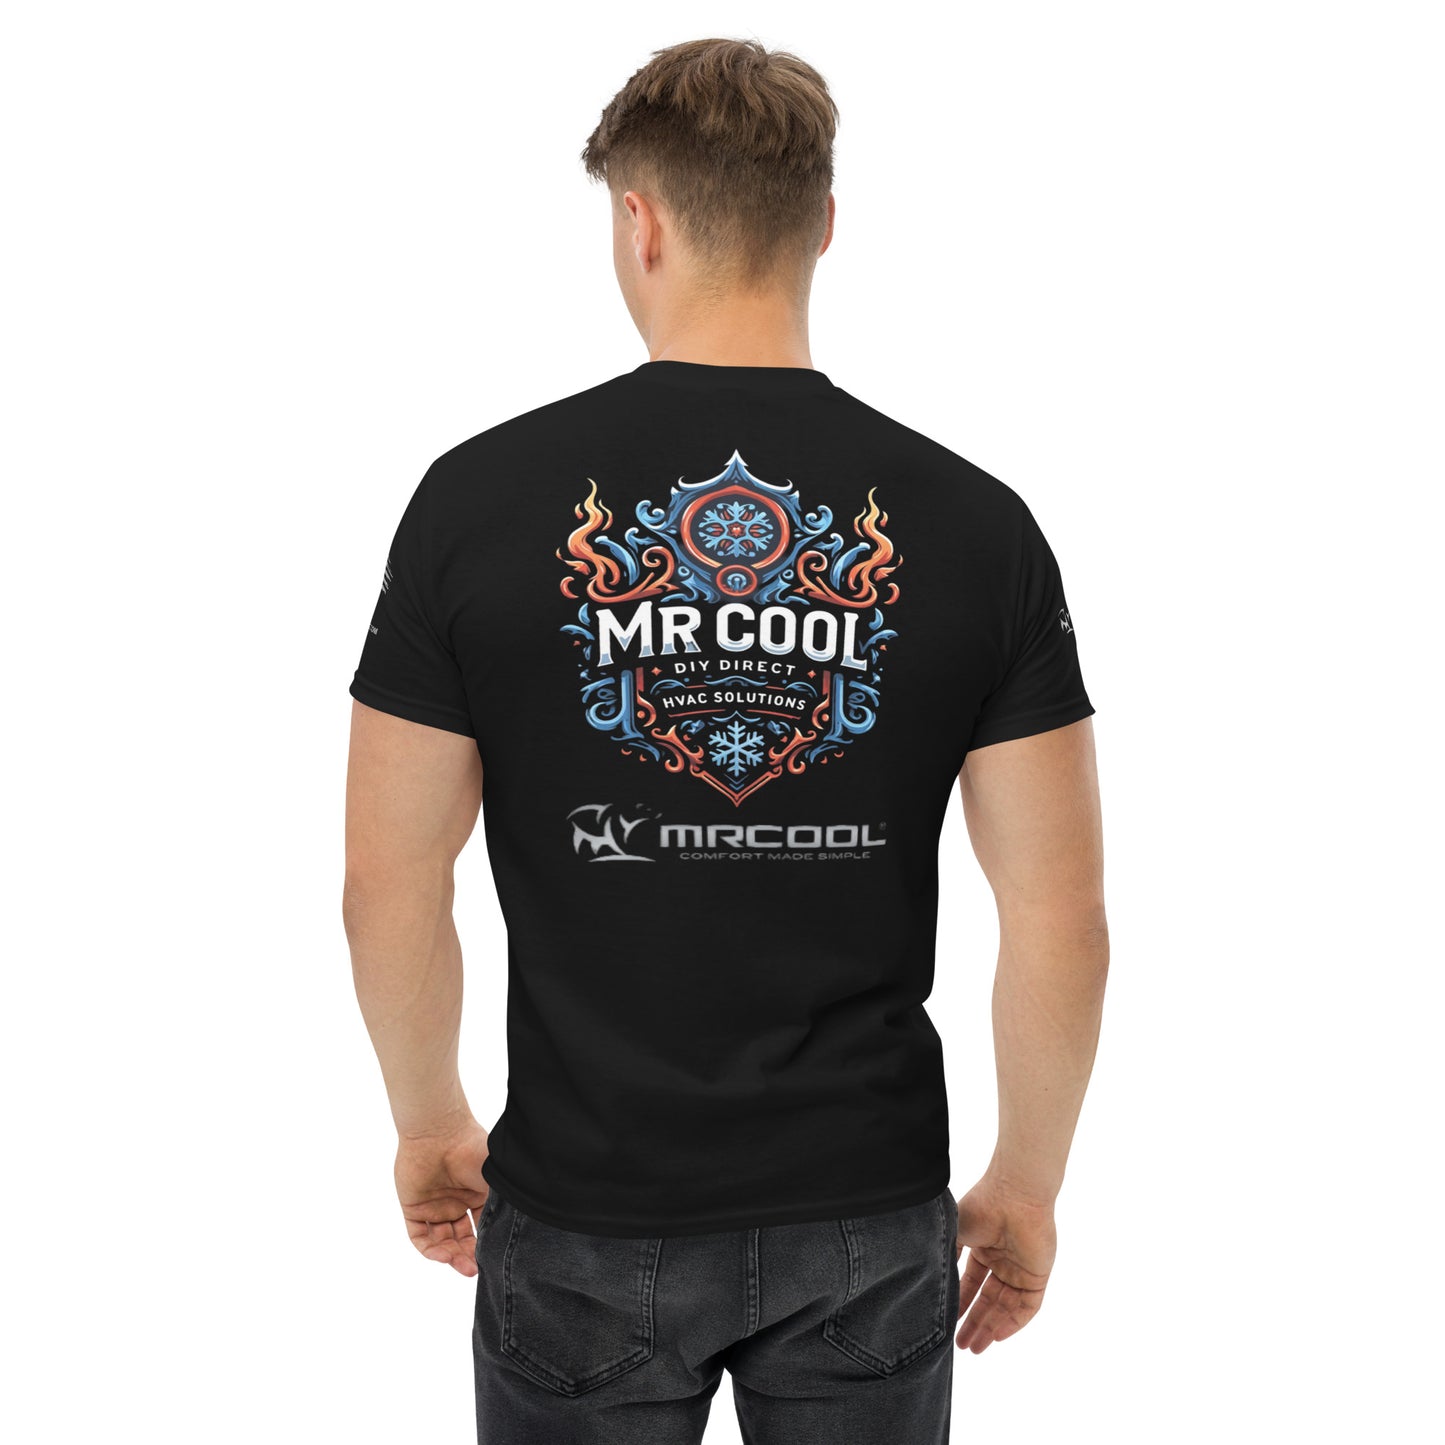 A man viewed from the back wearing a black T-shirt with the text "MR COOL" in bold, stylized letters surrounded by flame designs. The logo for "Exclusive HVAC-Themed Custom Tees - MRCOOL DIY Direct" is below, perfect for DIY HVAC enthusiasts.